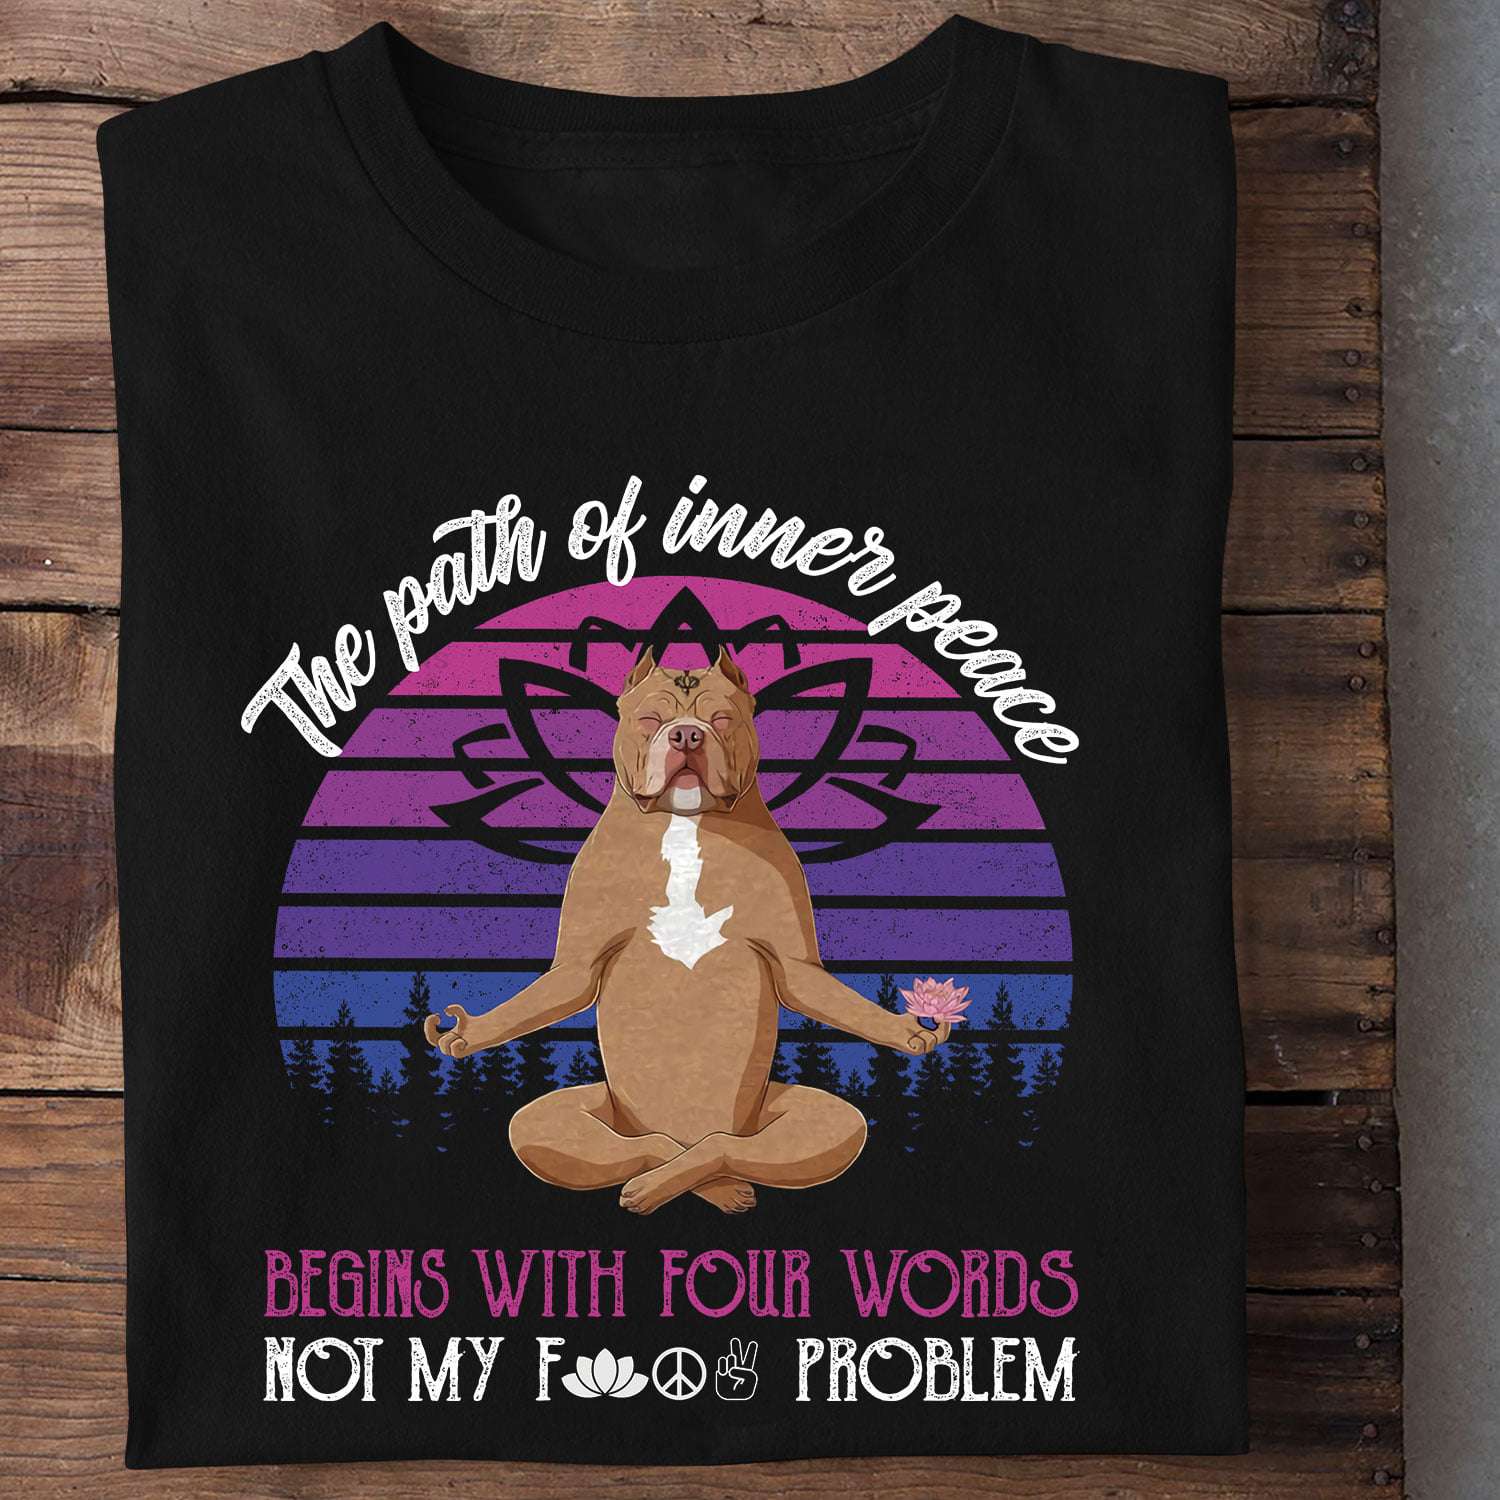 Pitbull Yoga - The path of inners peace begins with four words not my